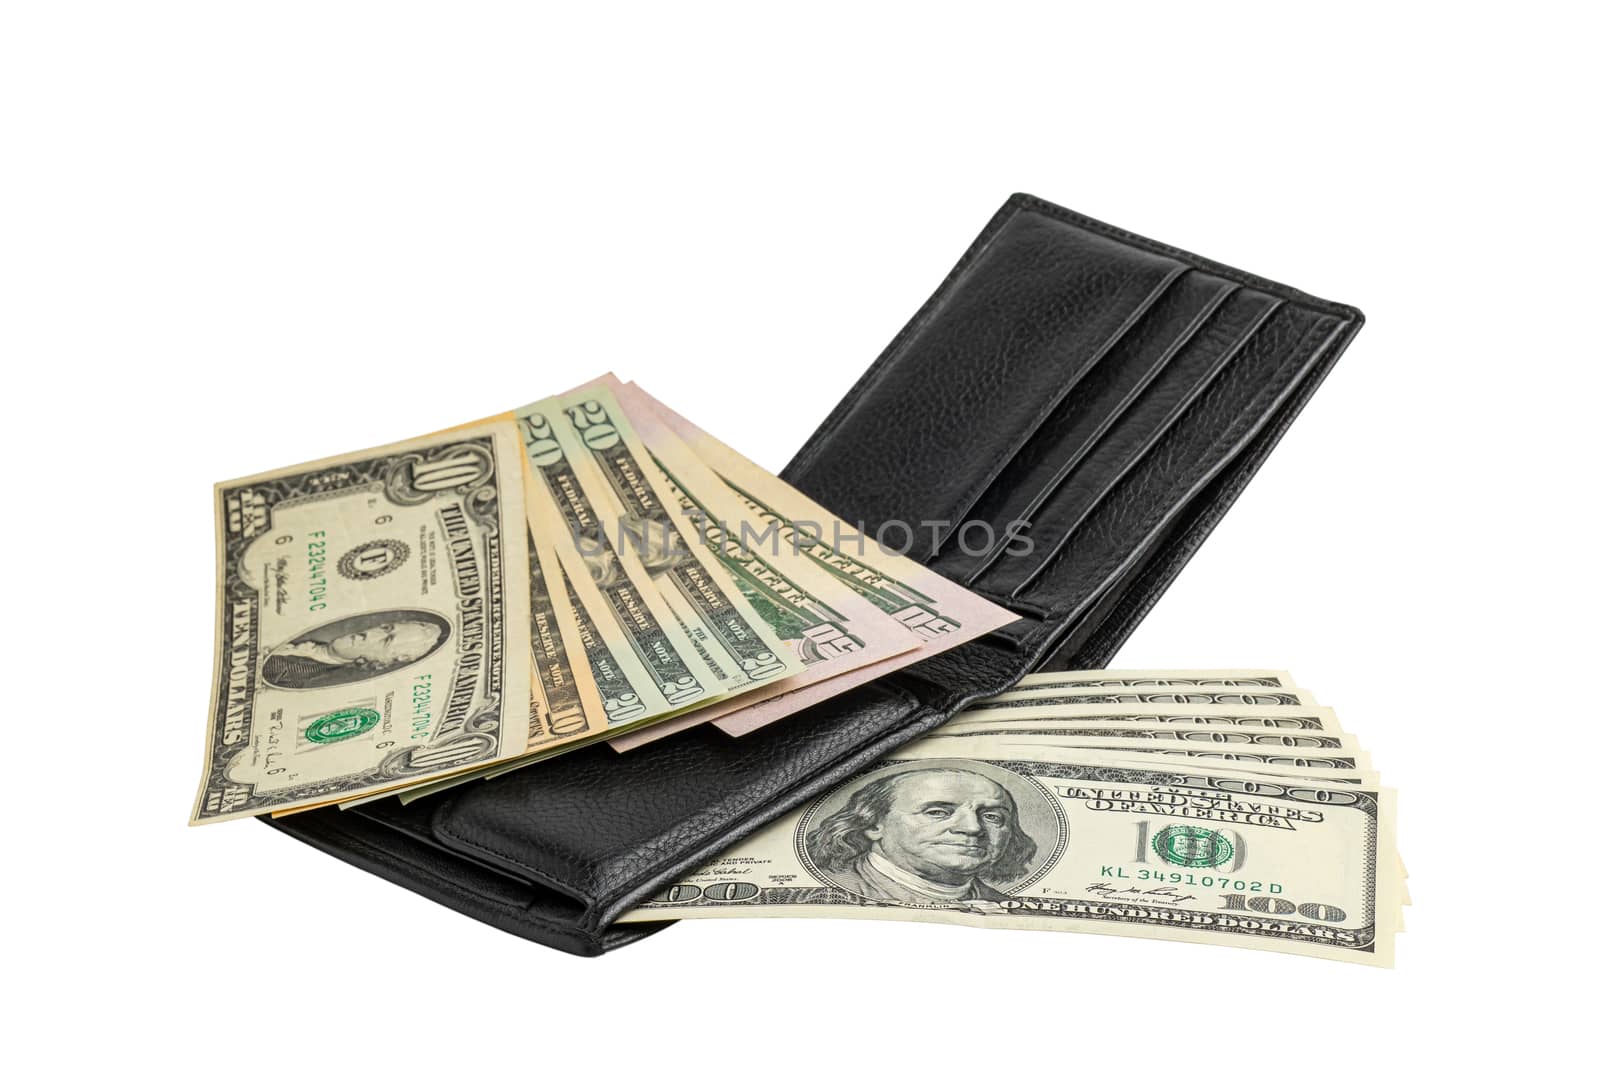 Wallet with banknotes. Paper money in wallet isolated on white background. National currency of the USA.